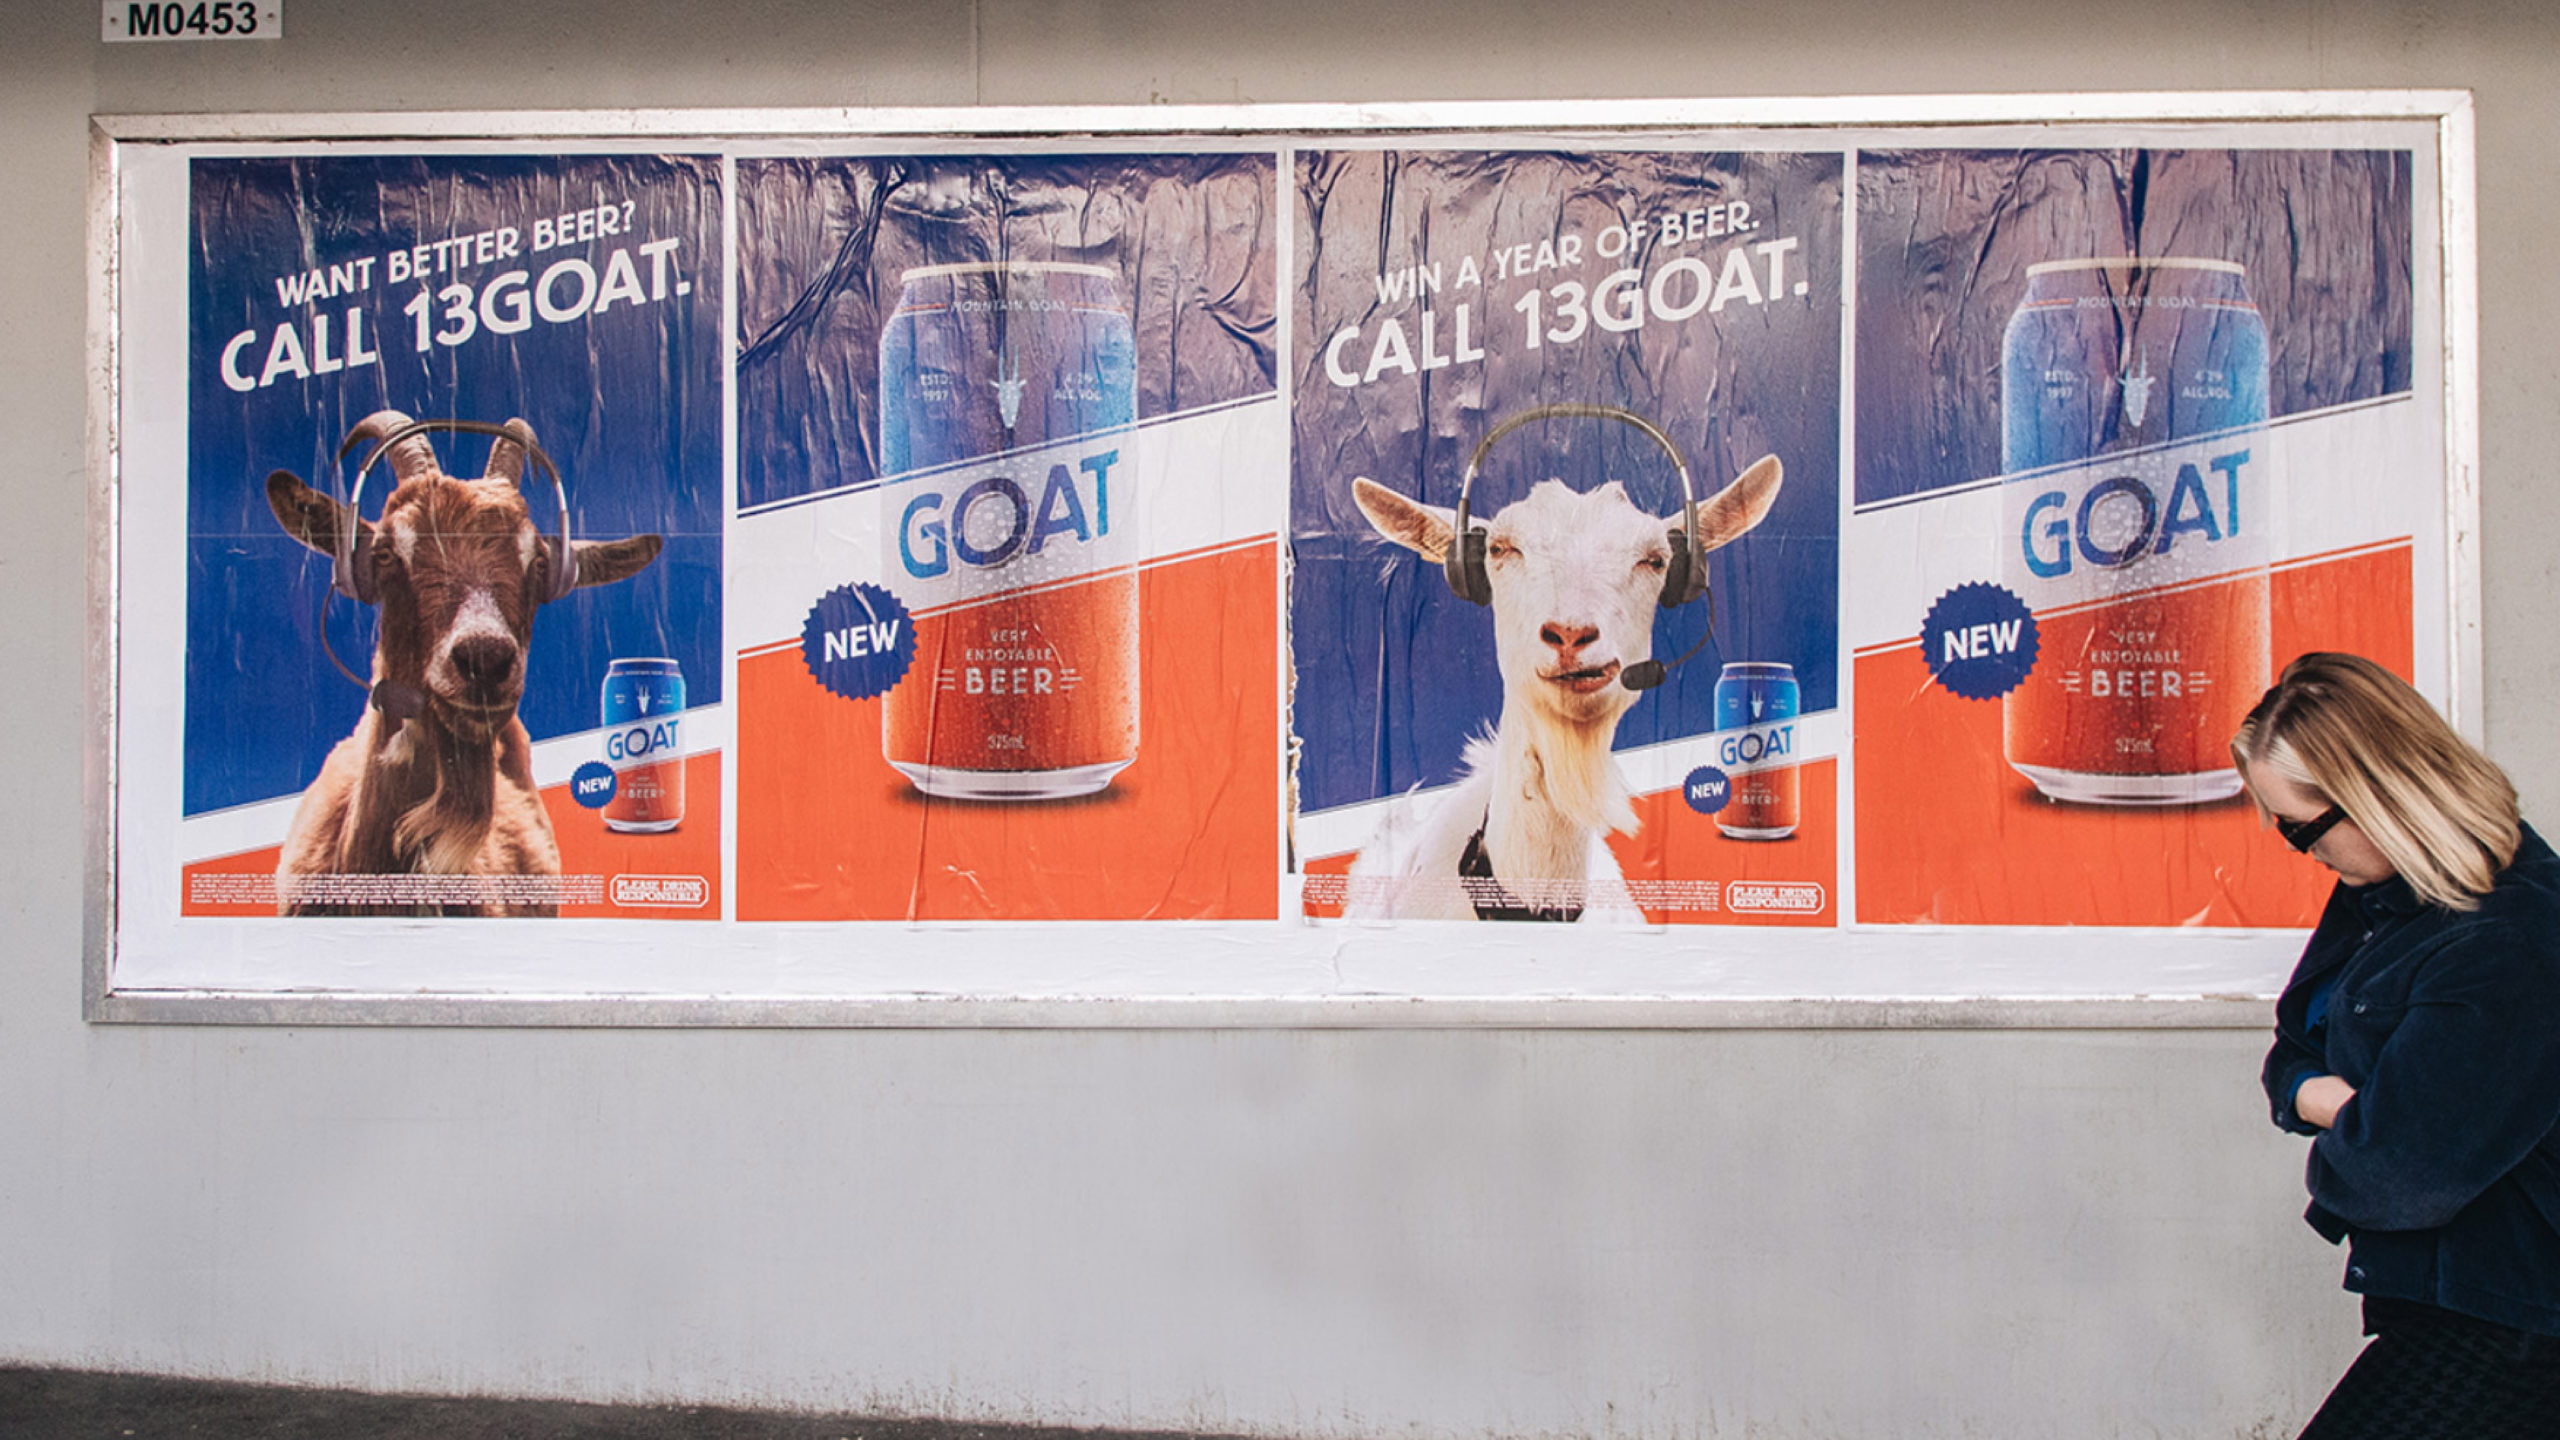 Goat beer out of home posters